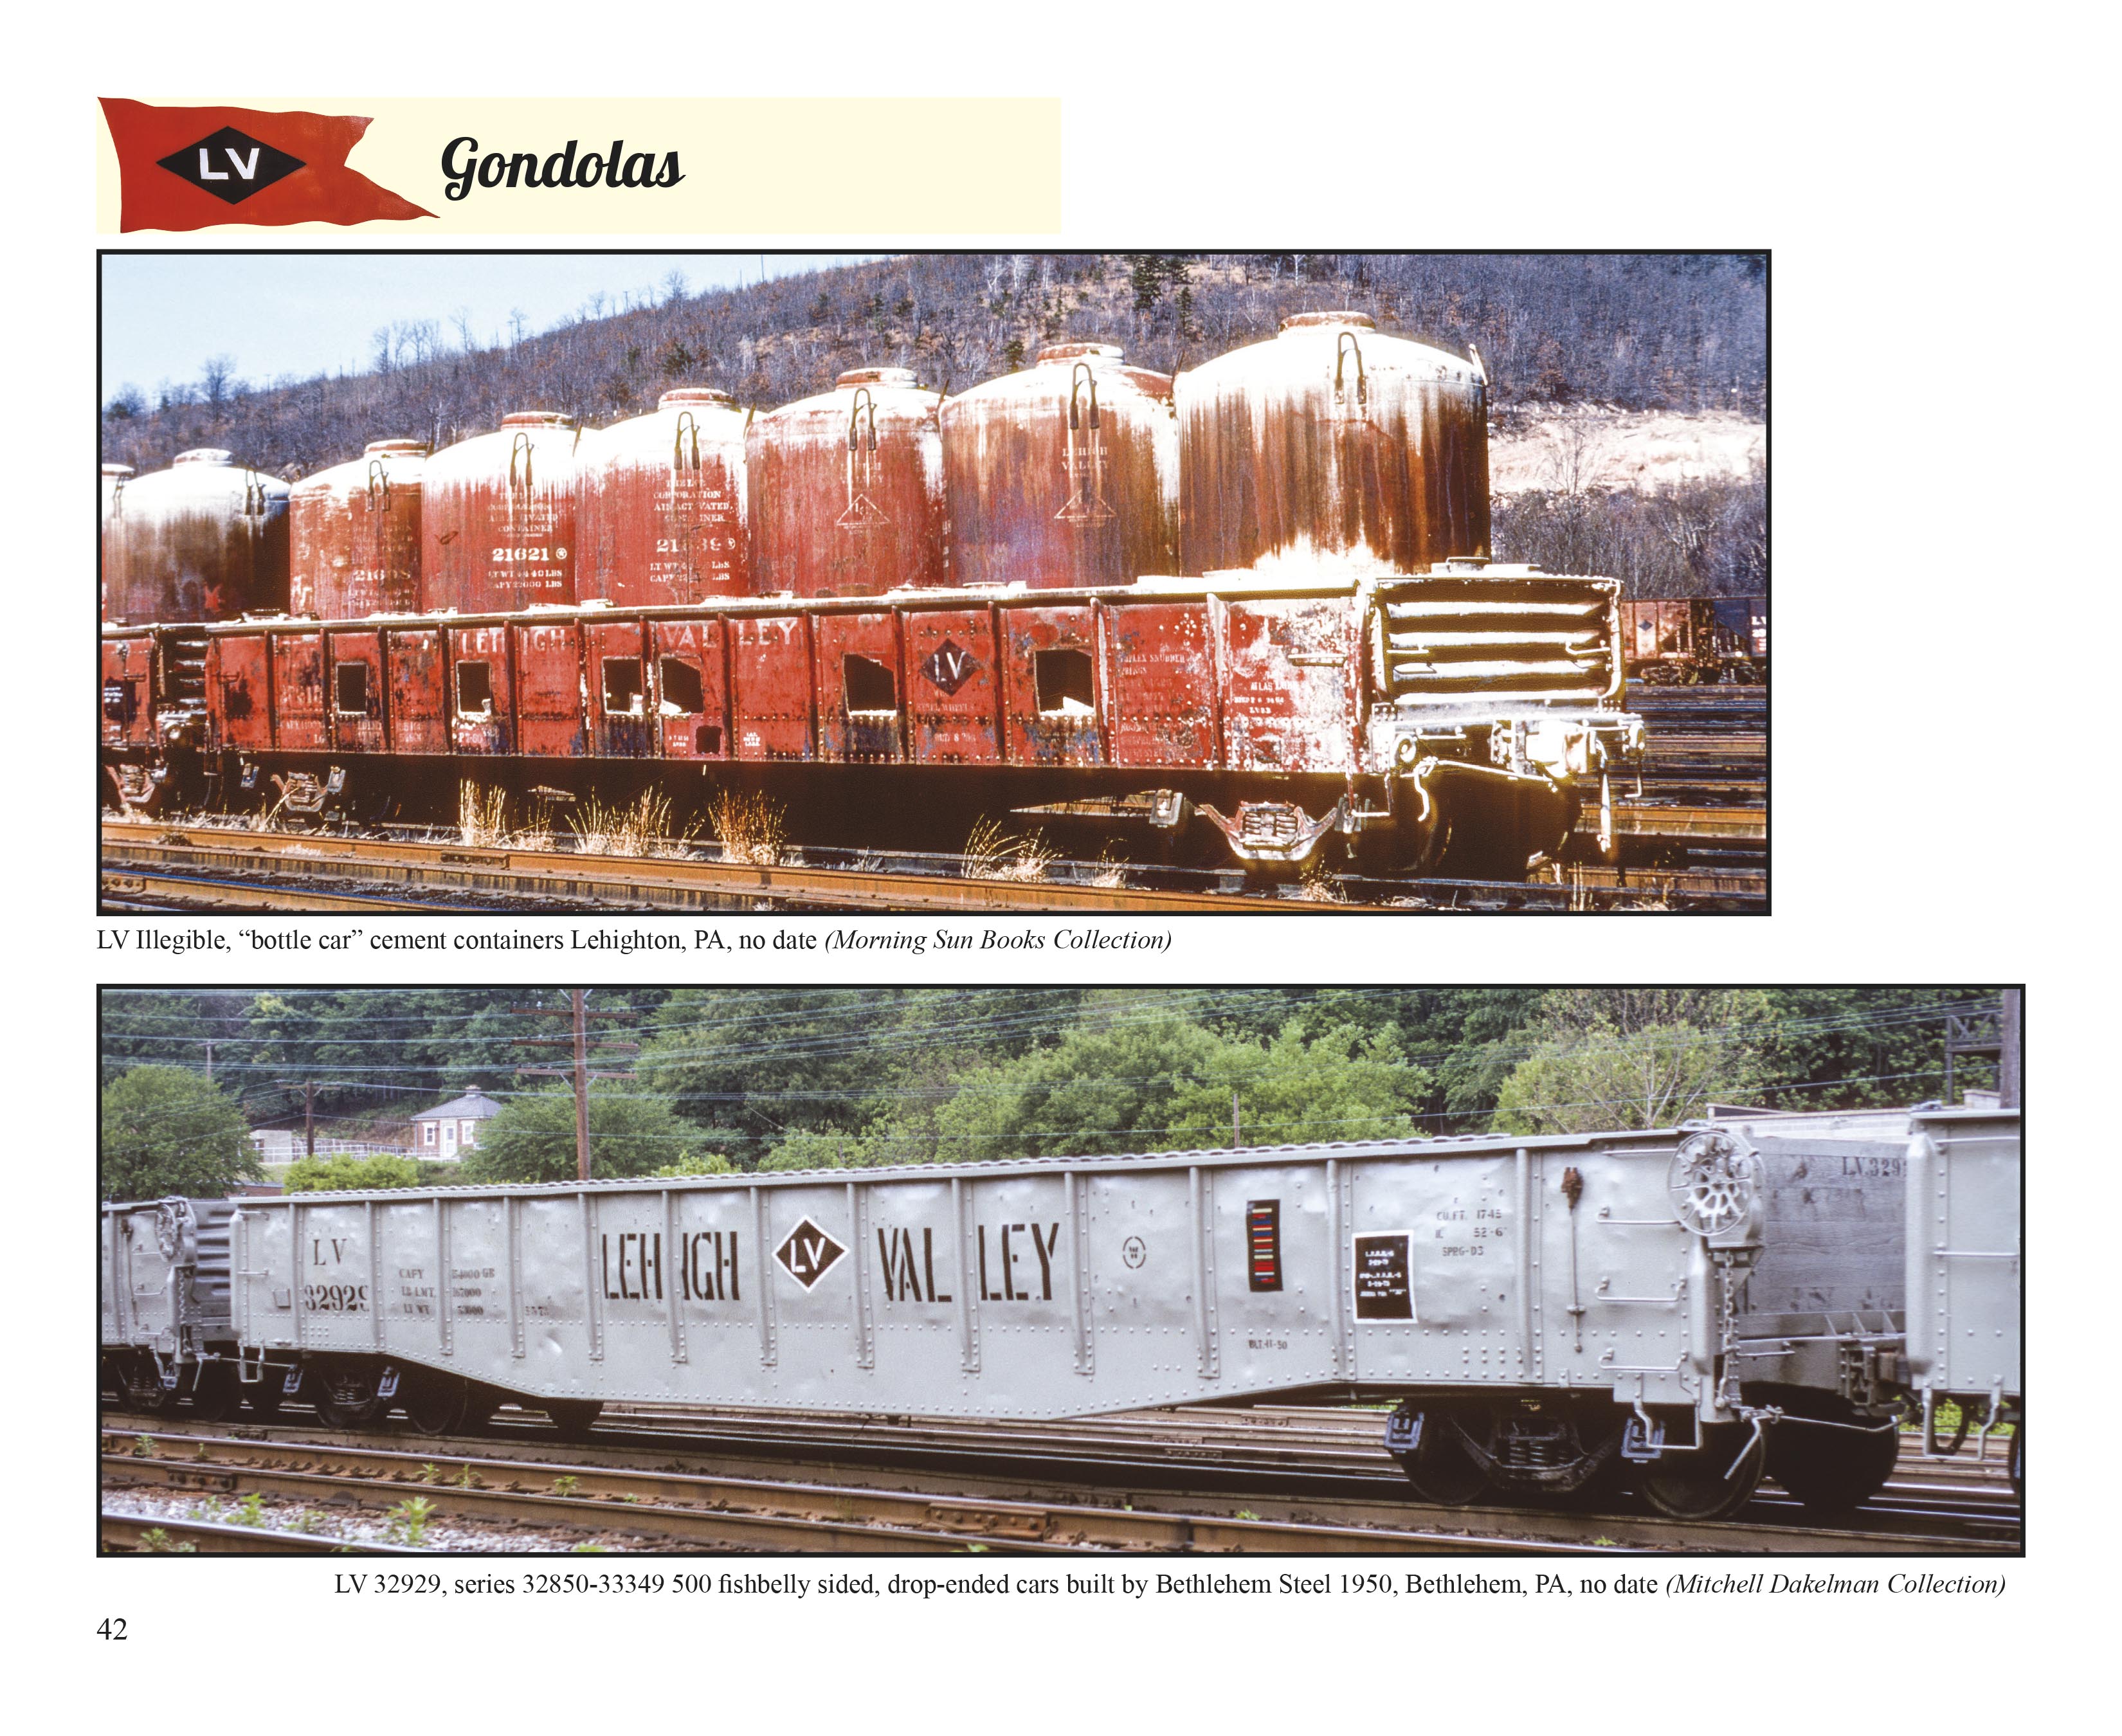 Morning Sun Books 841X Lehigh Valley Equipment: A Sampling of the LV's Freight, Passenger & MofW Cars Softcover